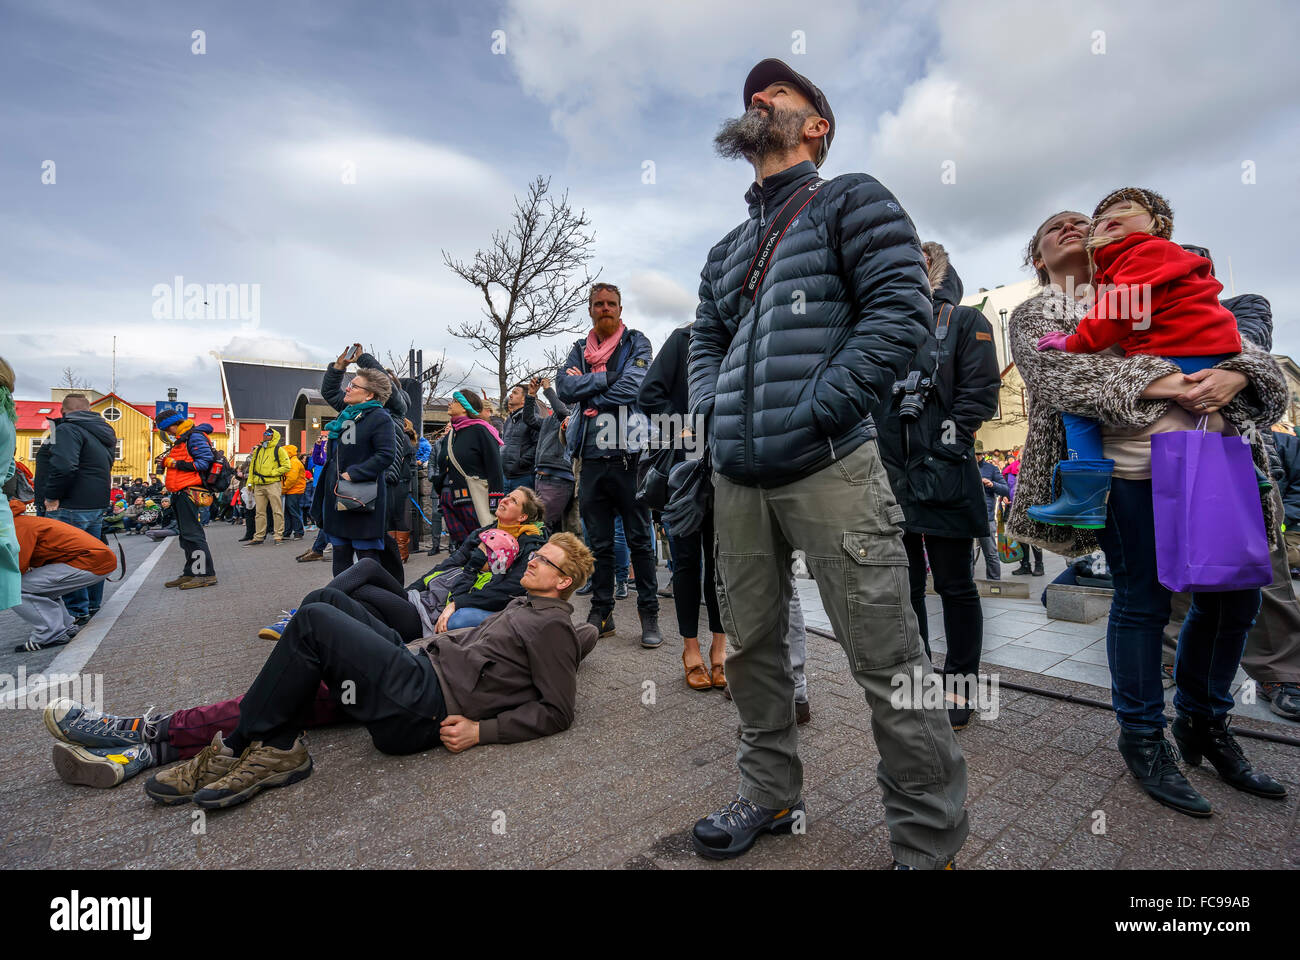 Crowd watching The Bandaloop vertical dance group performing during the Reykjavik Arts Festival, Iceland. Stock Photo